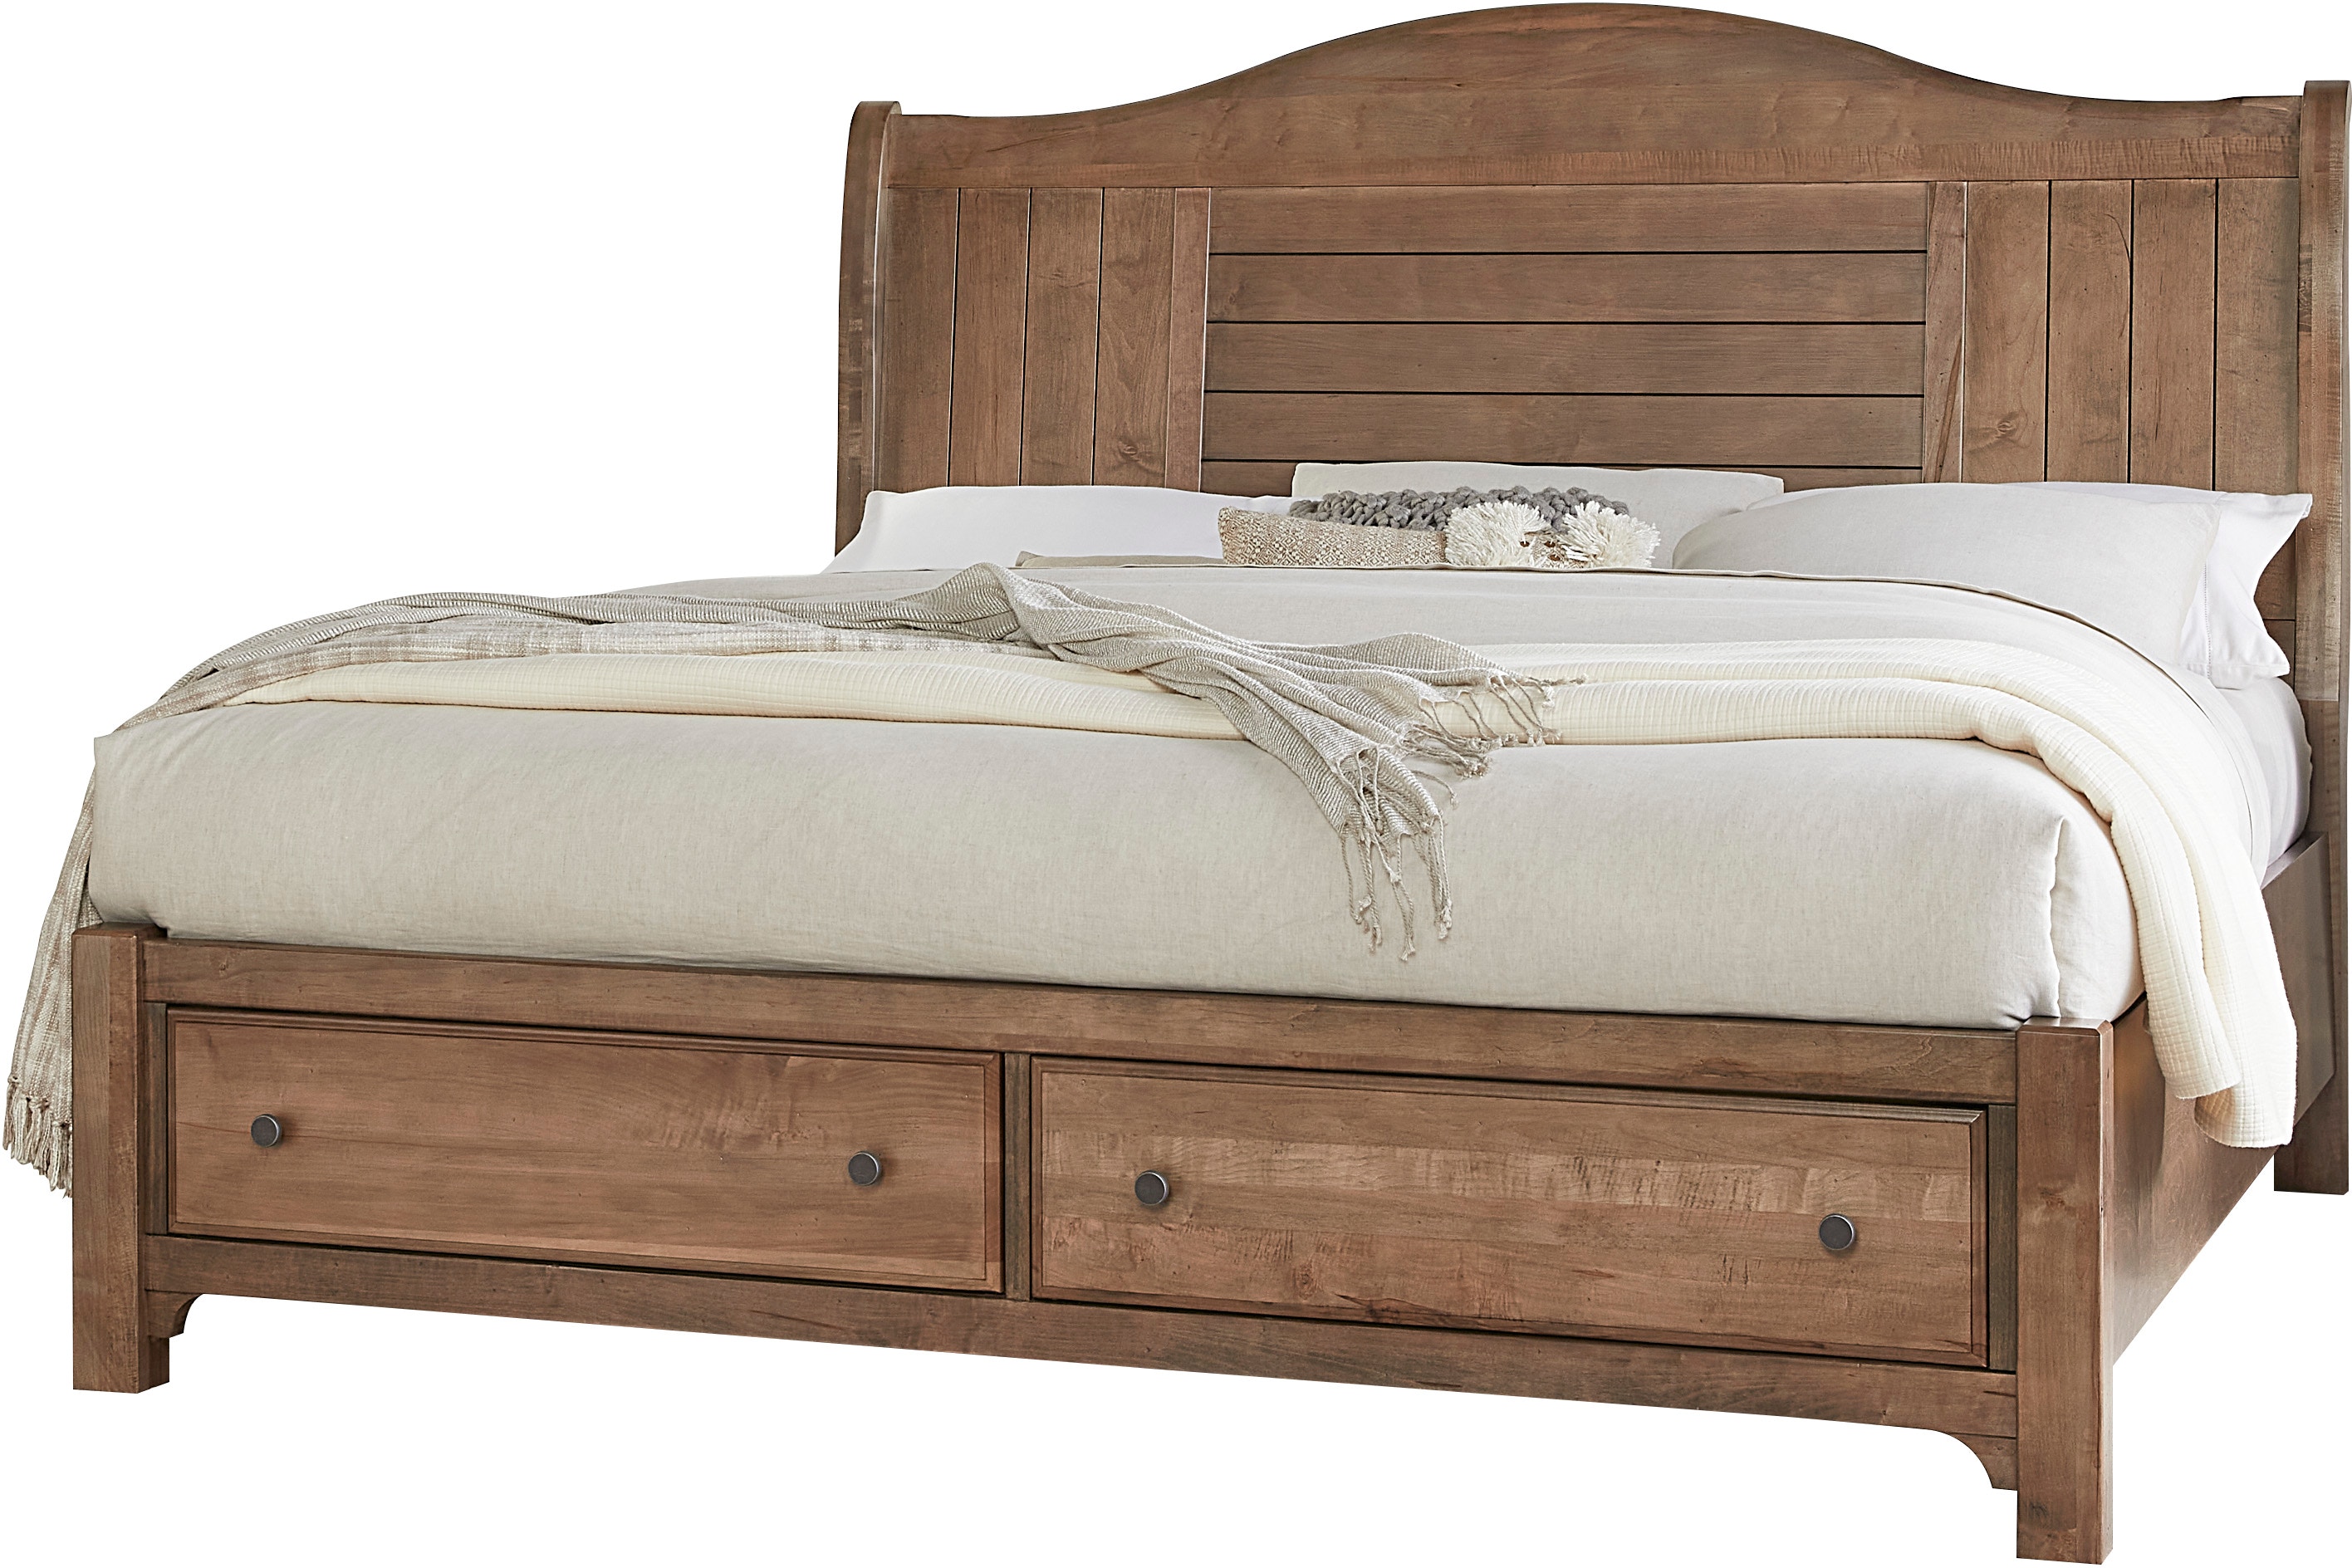 Armstrong Raad Reserve Vaughan-Bassett Furniture Company Youth Queen Sleigh Bed With Storage  Footboard